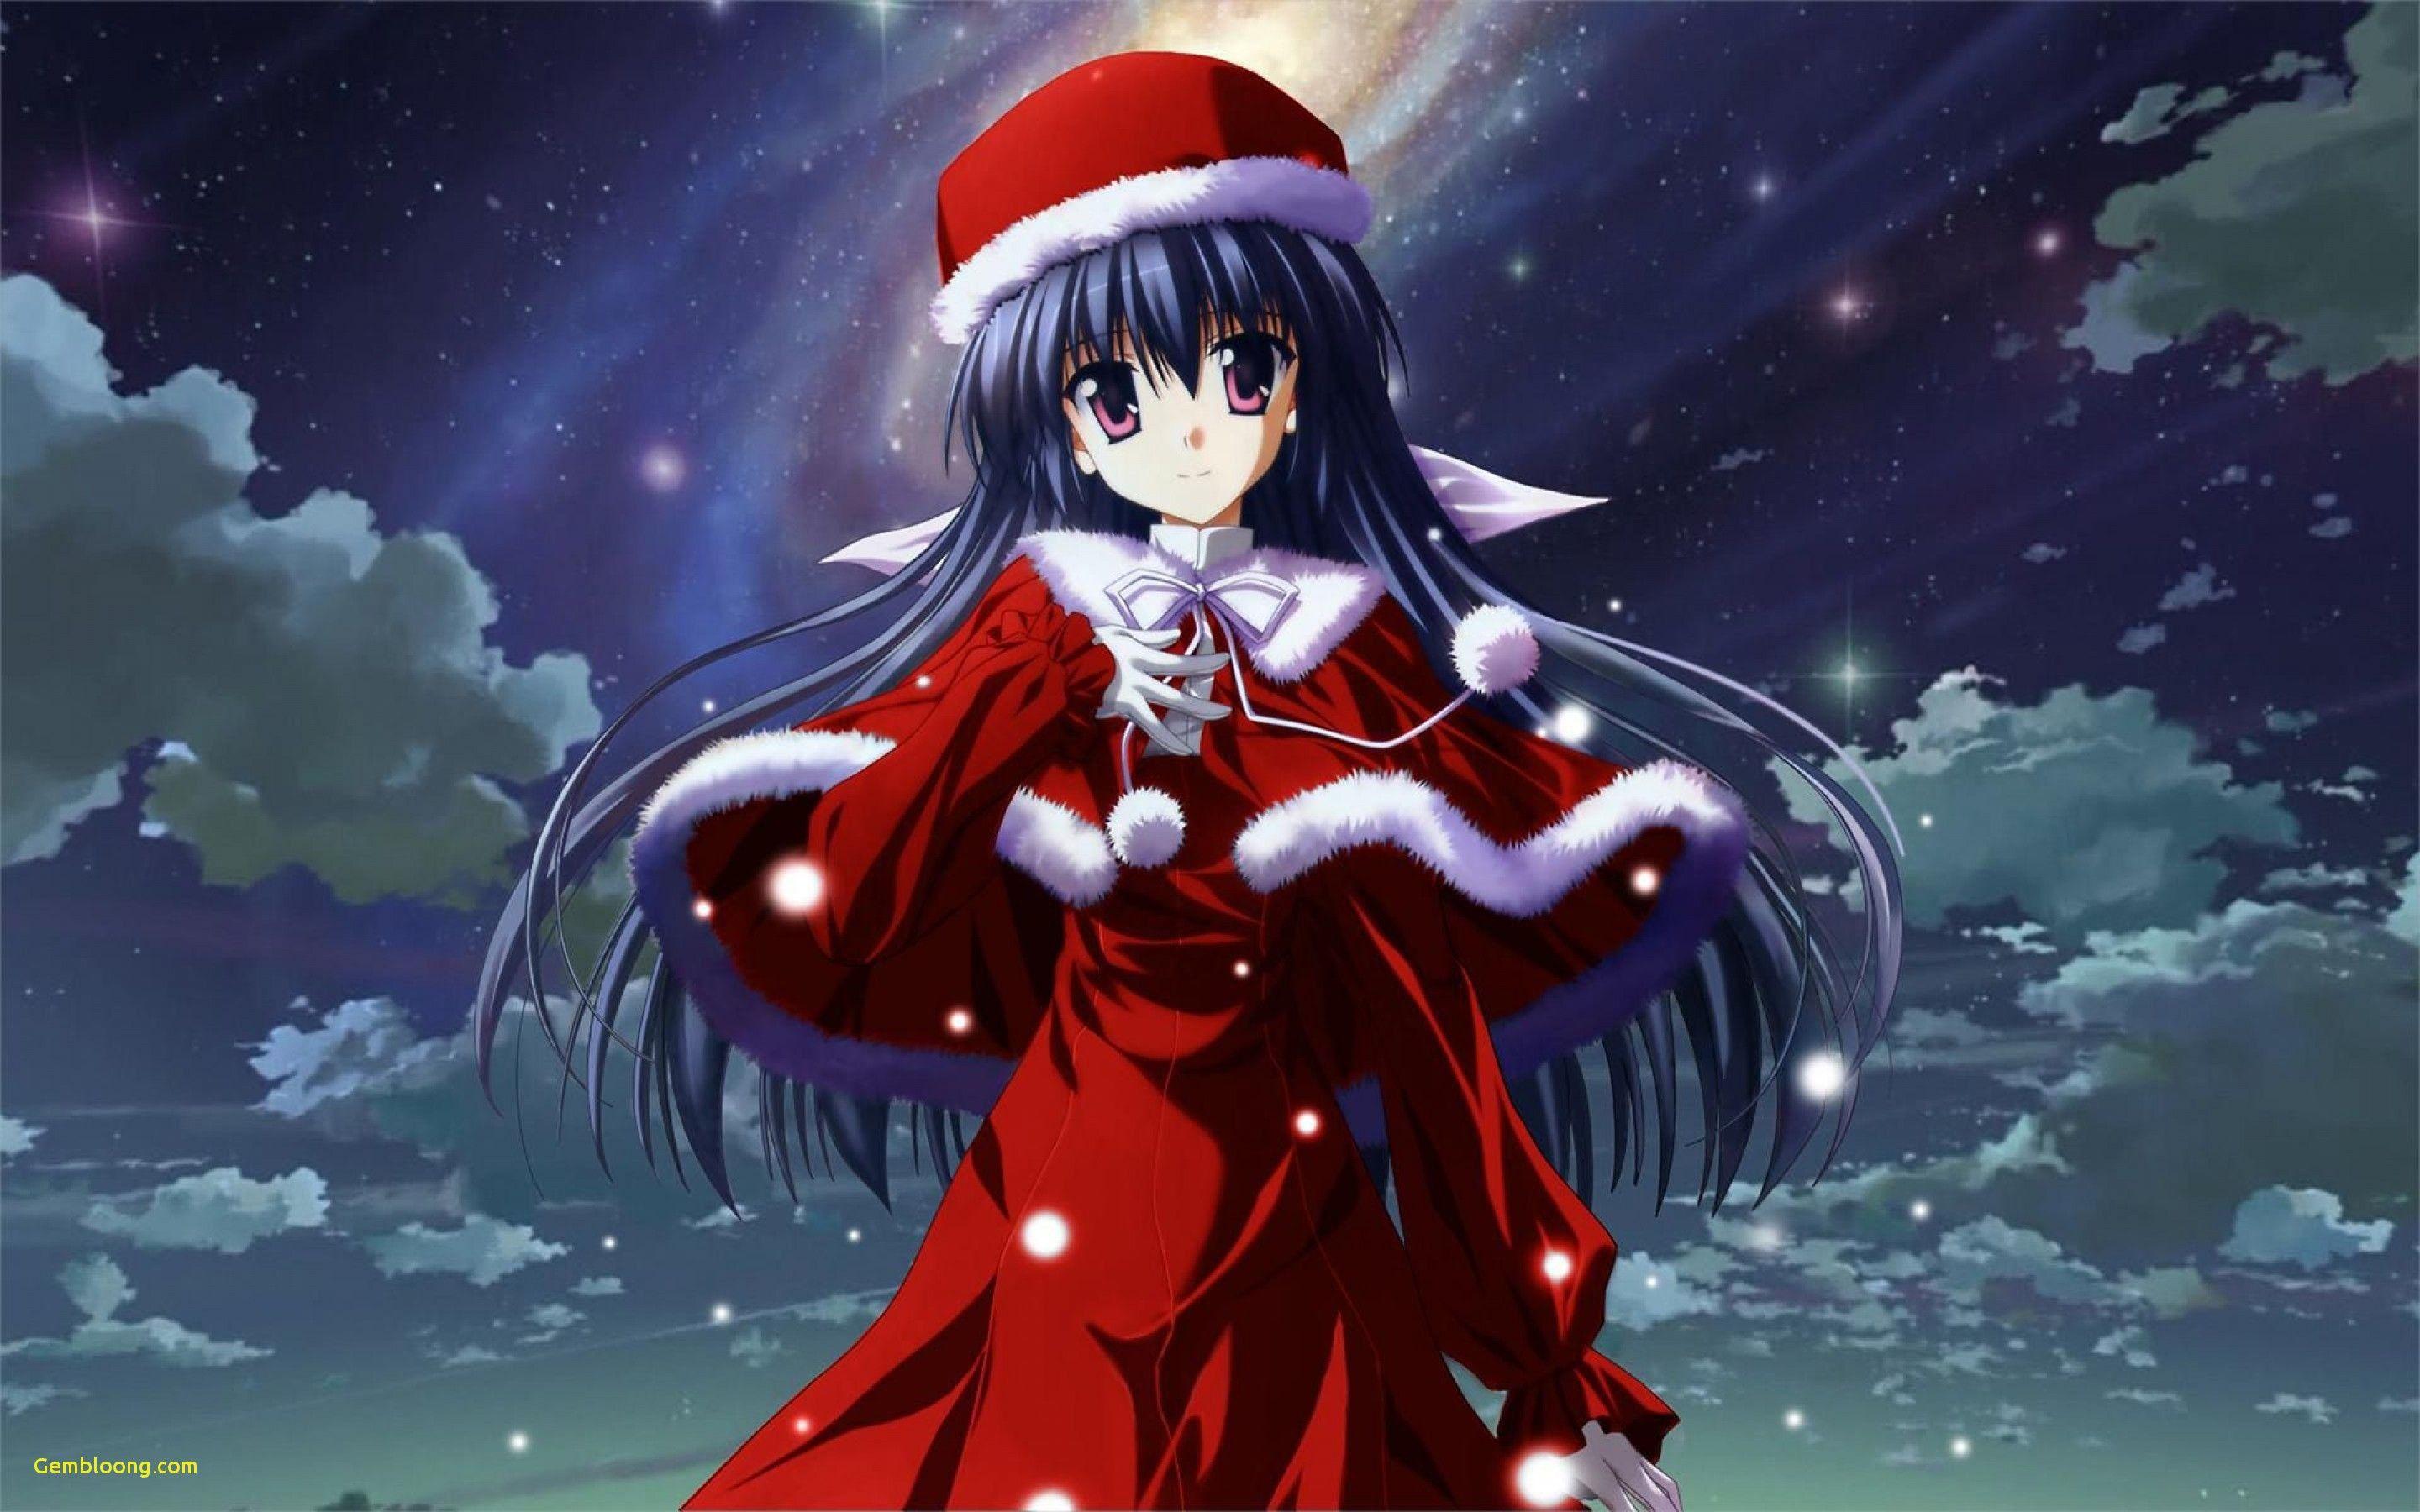 Amazing Wallpaper Of Anime Unique Free Cute Anime Christmas